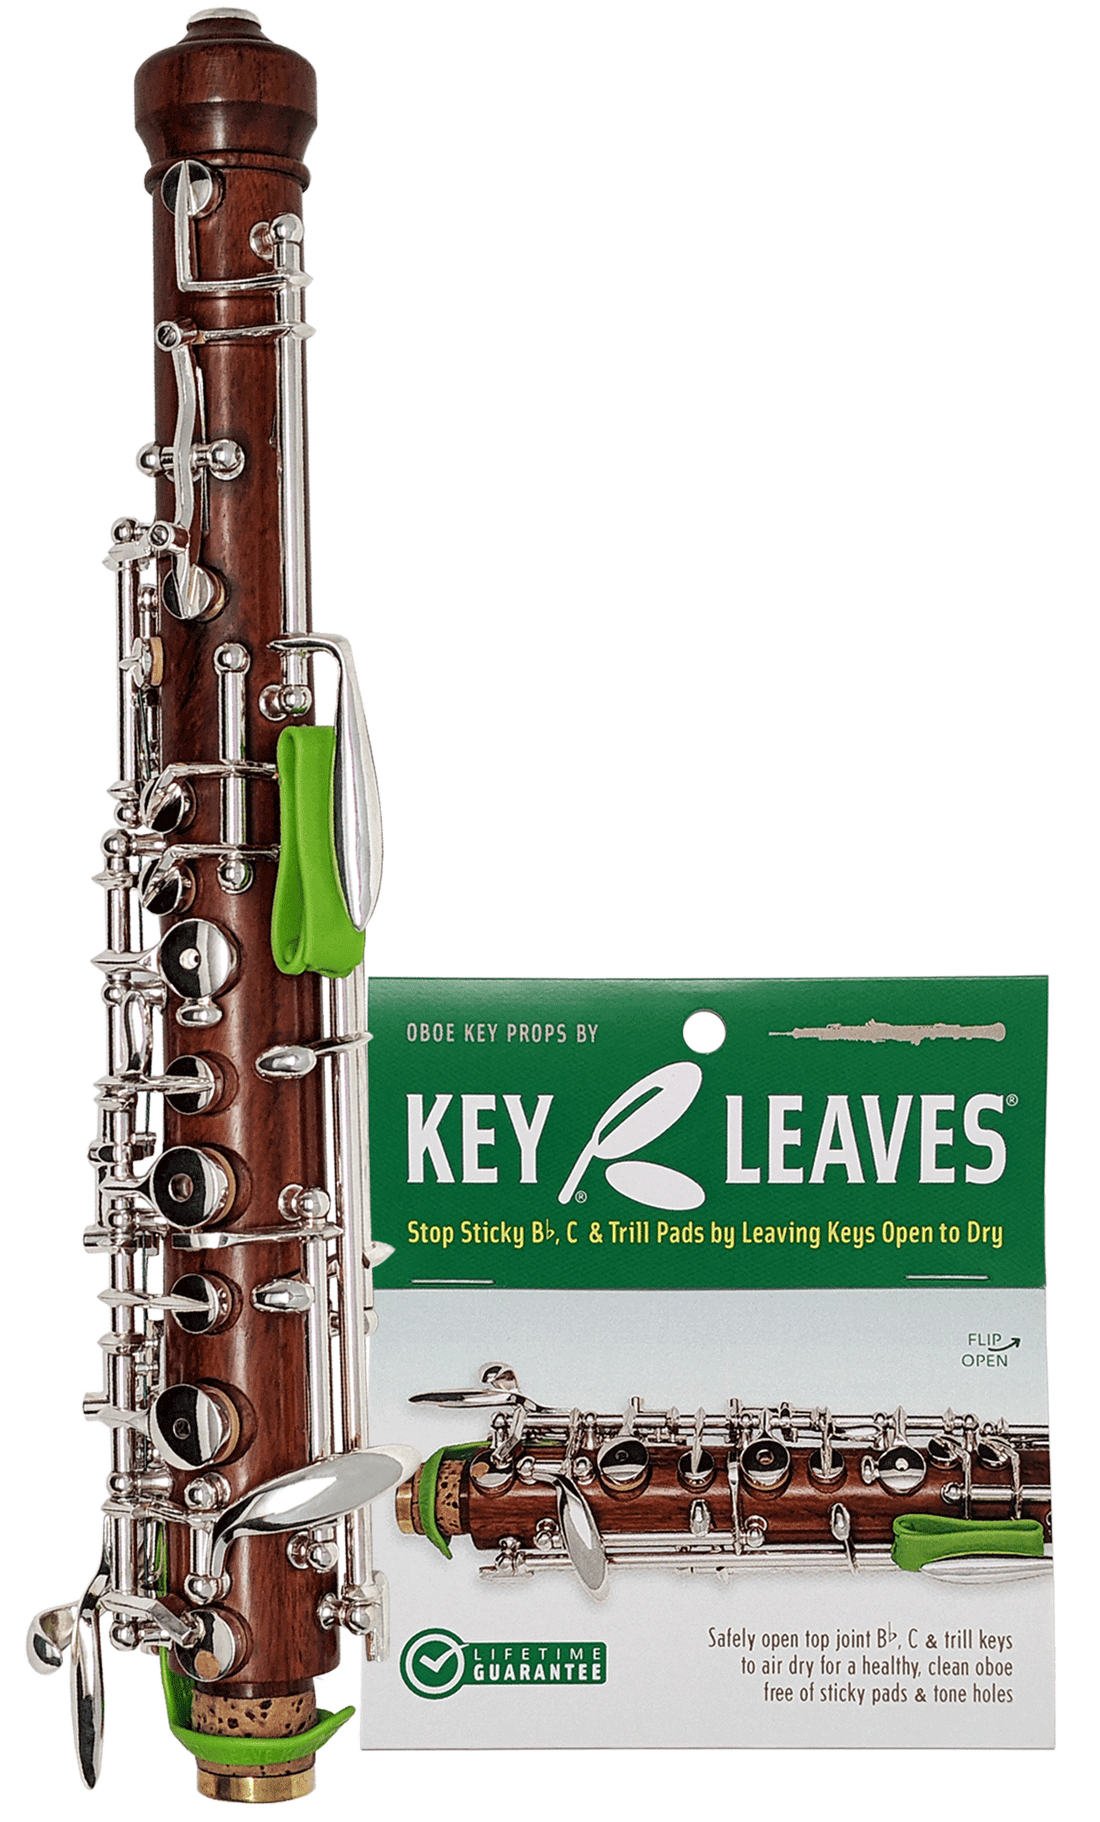 New Oboe Care Product from Key Leaves